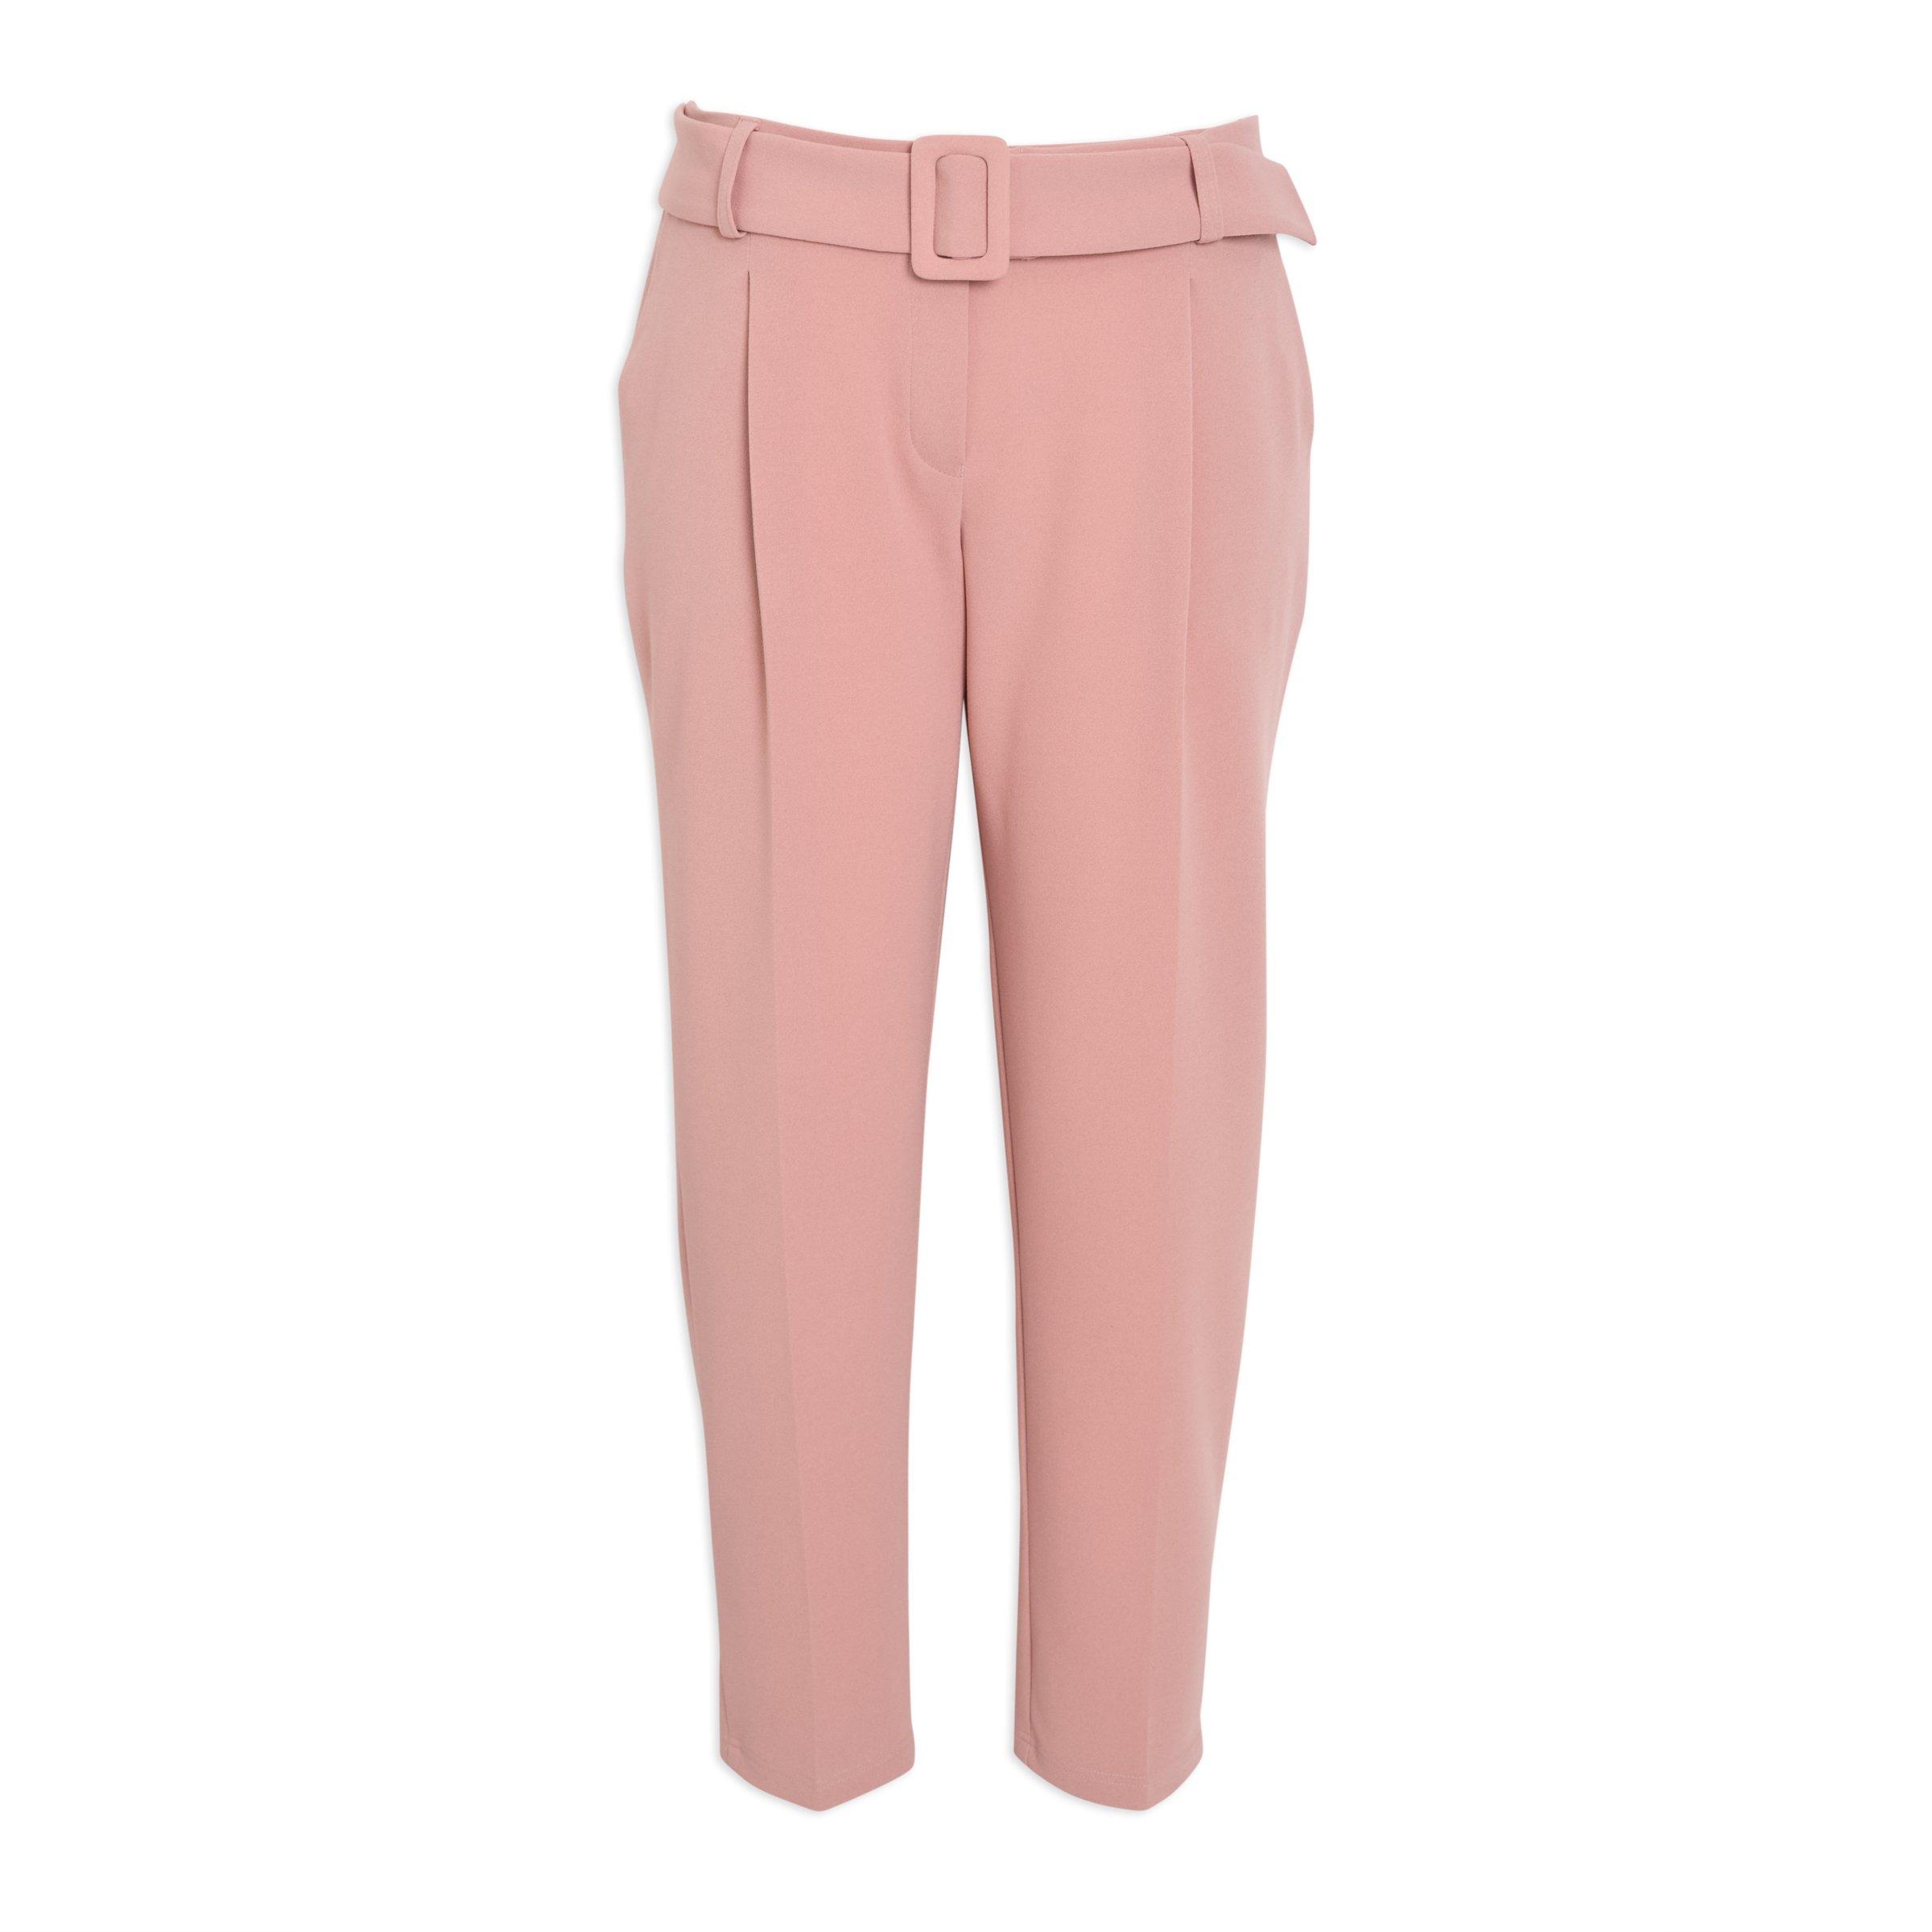 Buy Truworths Dusty Pink Tapered Pant Online | Truworths